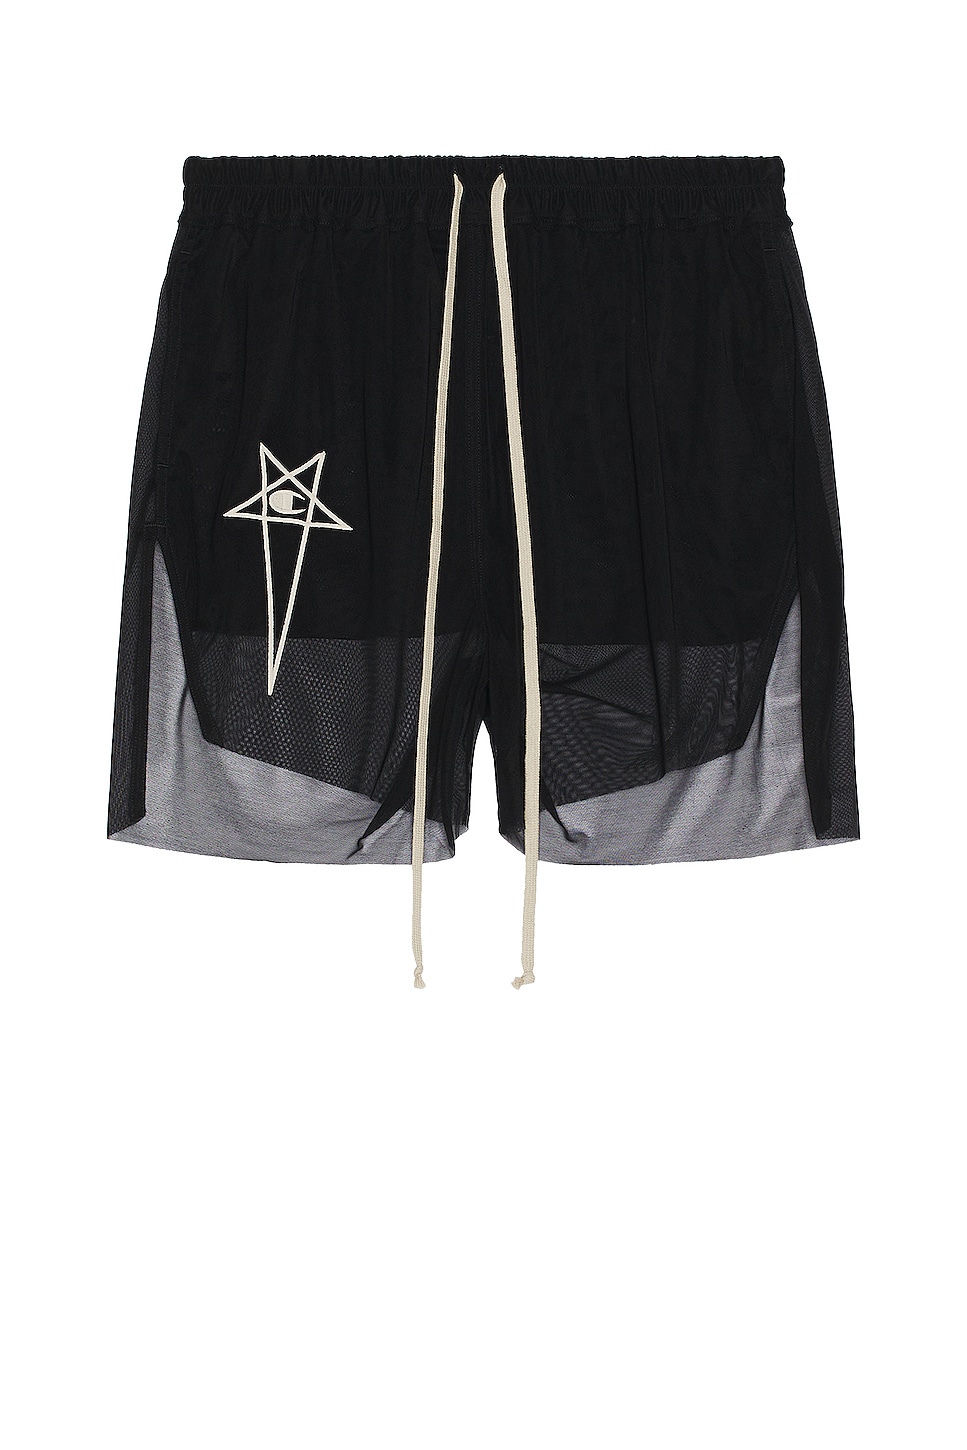 Image 1 of Rick Owens Dolphin Boxers in Black